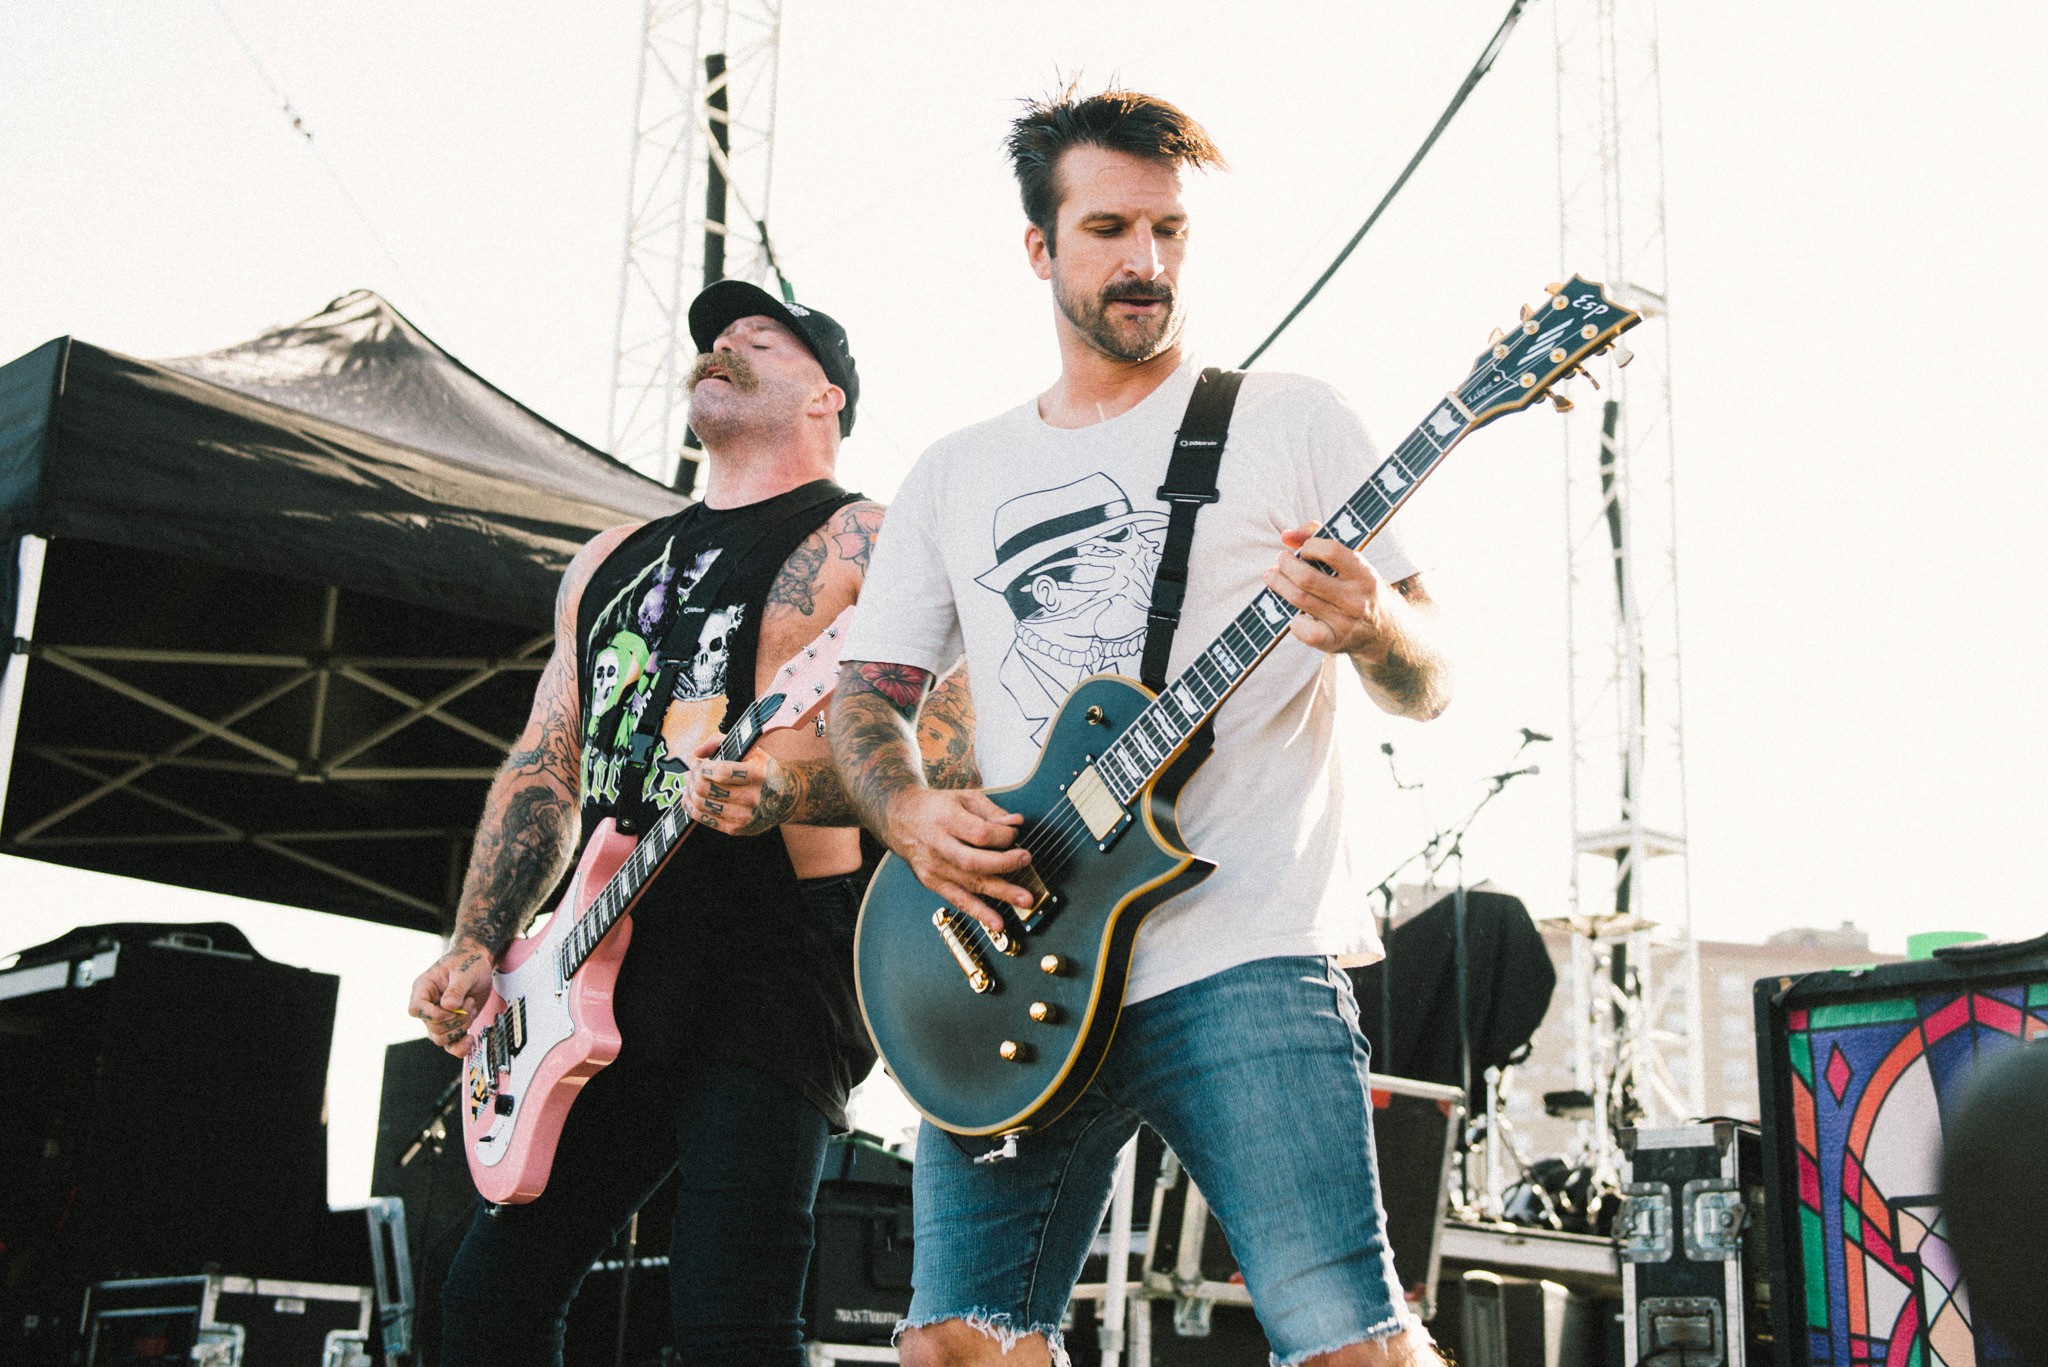 Every Time I Die Stone Pony Summer Stage Stars and Scars Photo